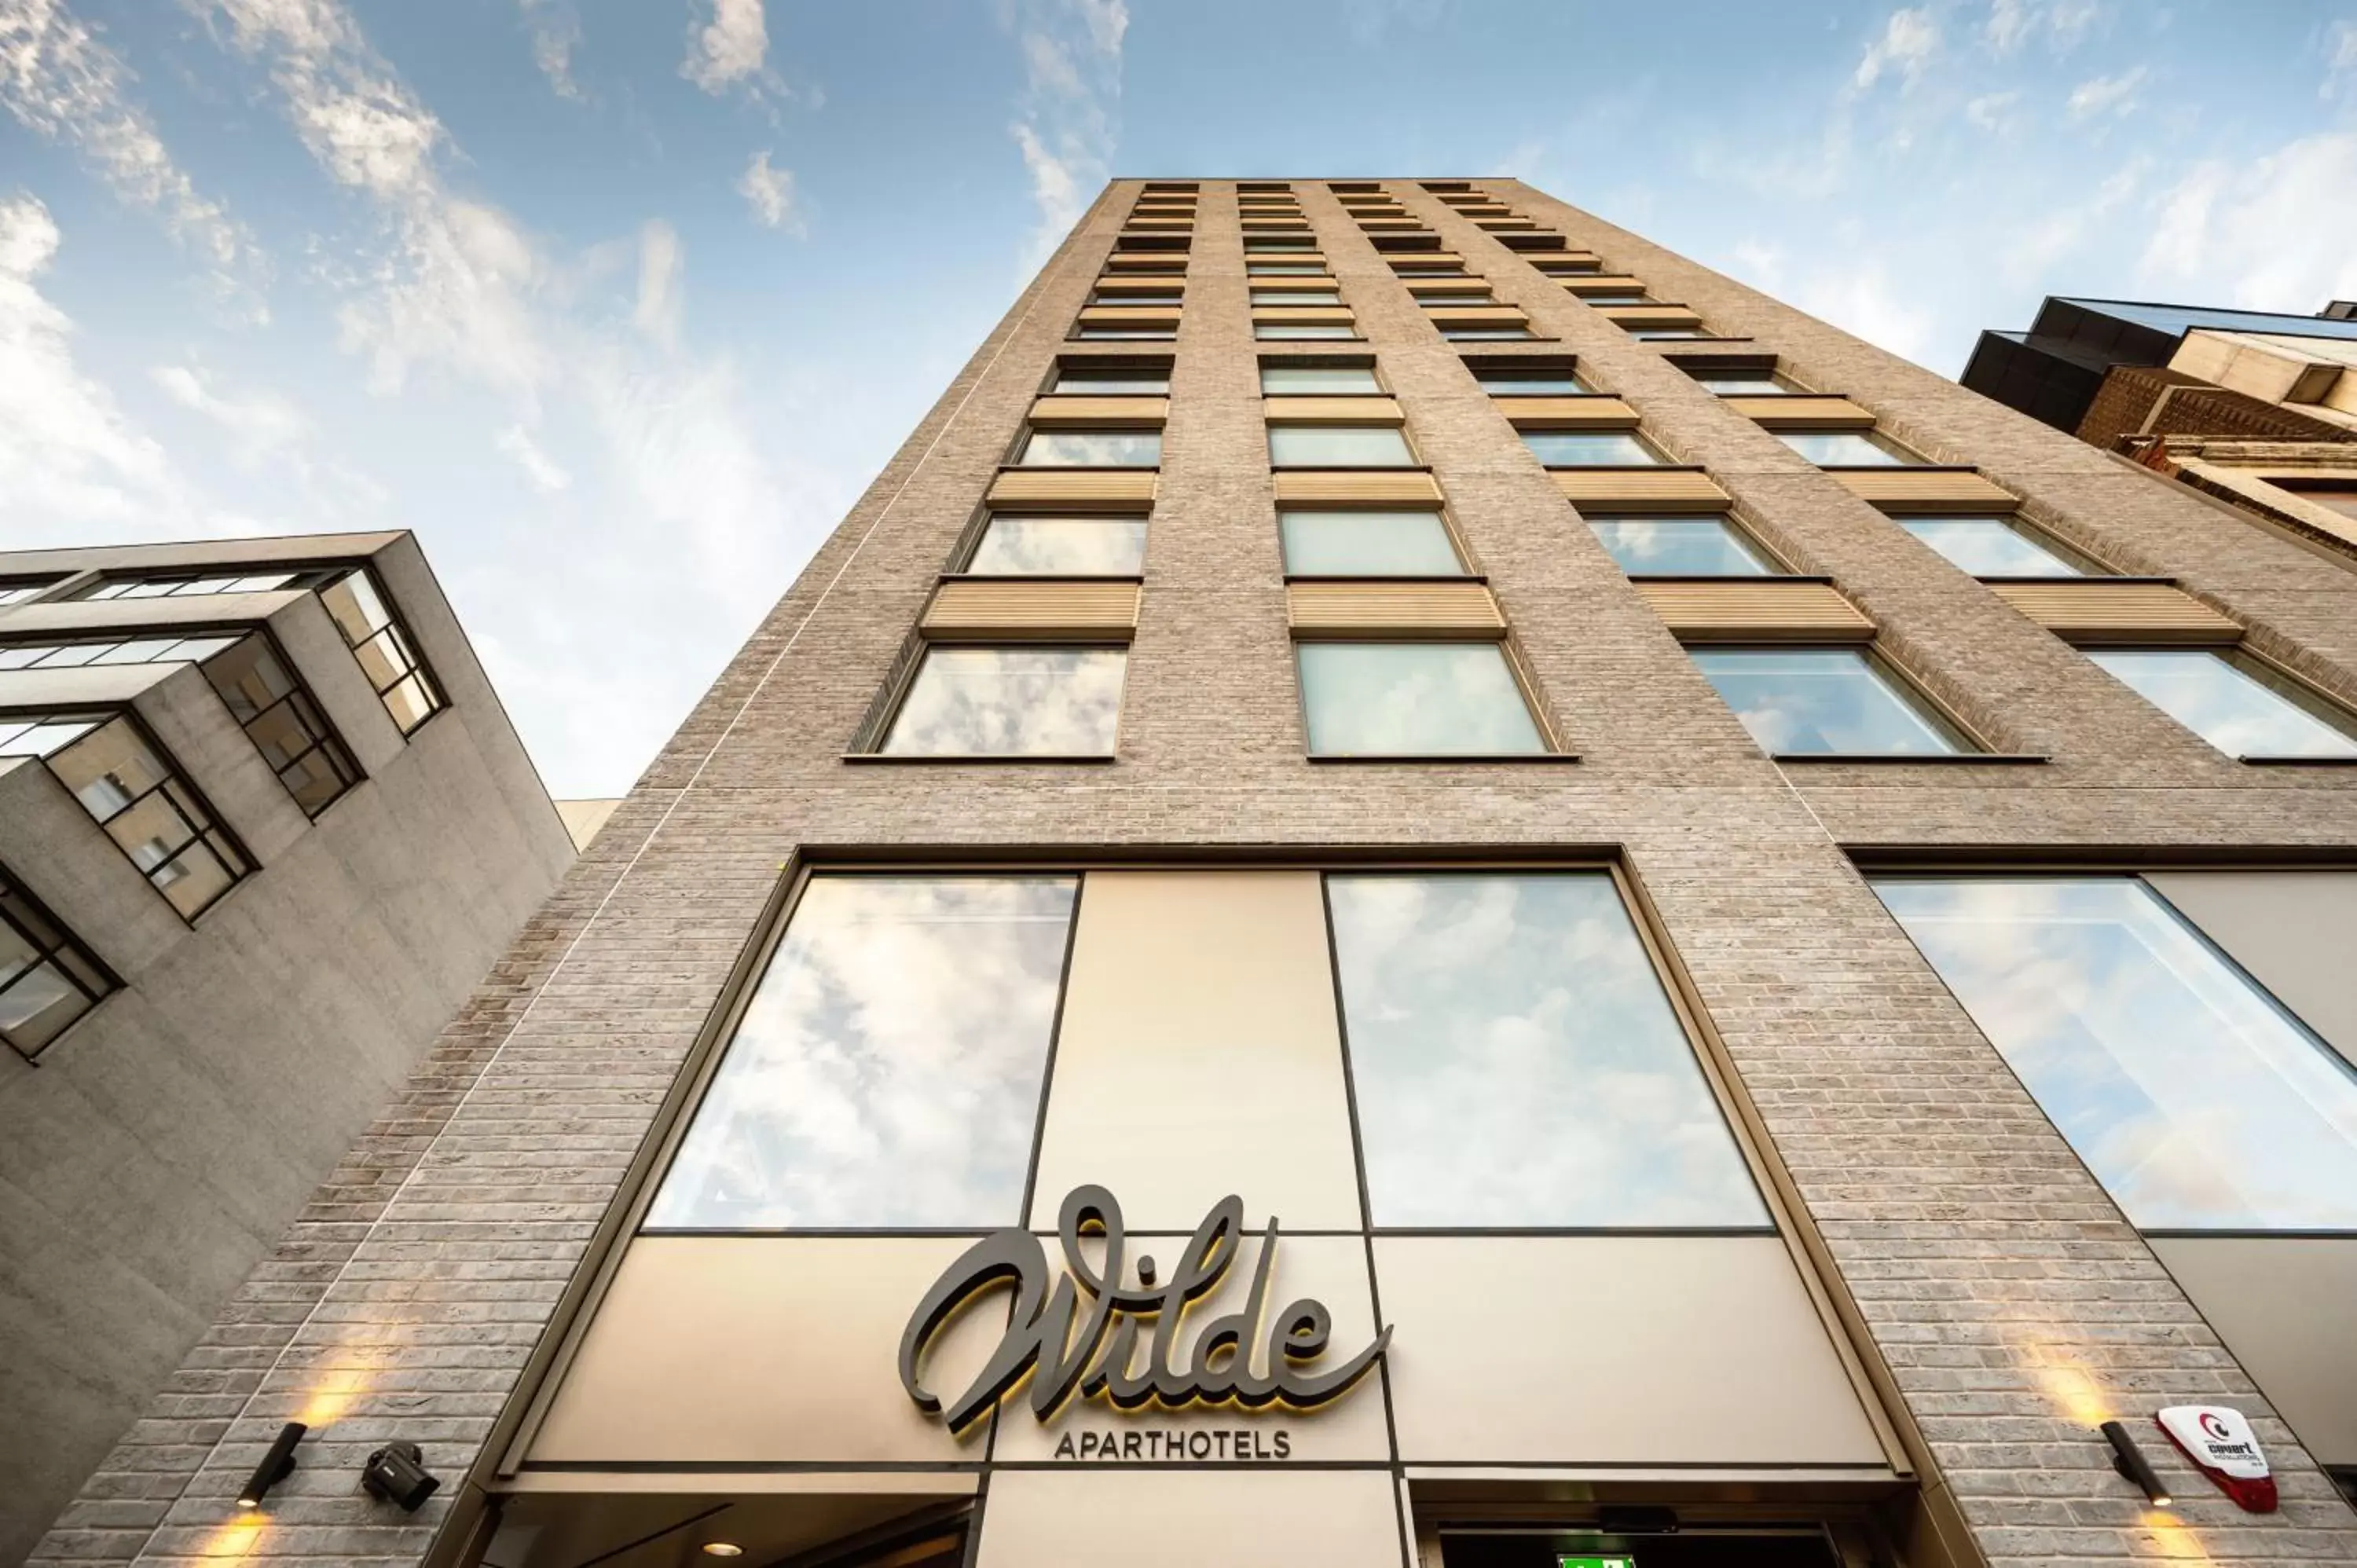 Property Building in Wilde Aparthotels by Staycity London Aldgate Tower Bridge